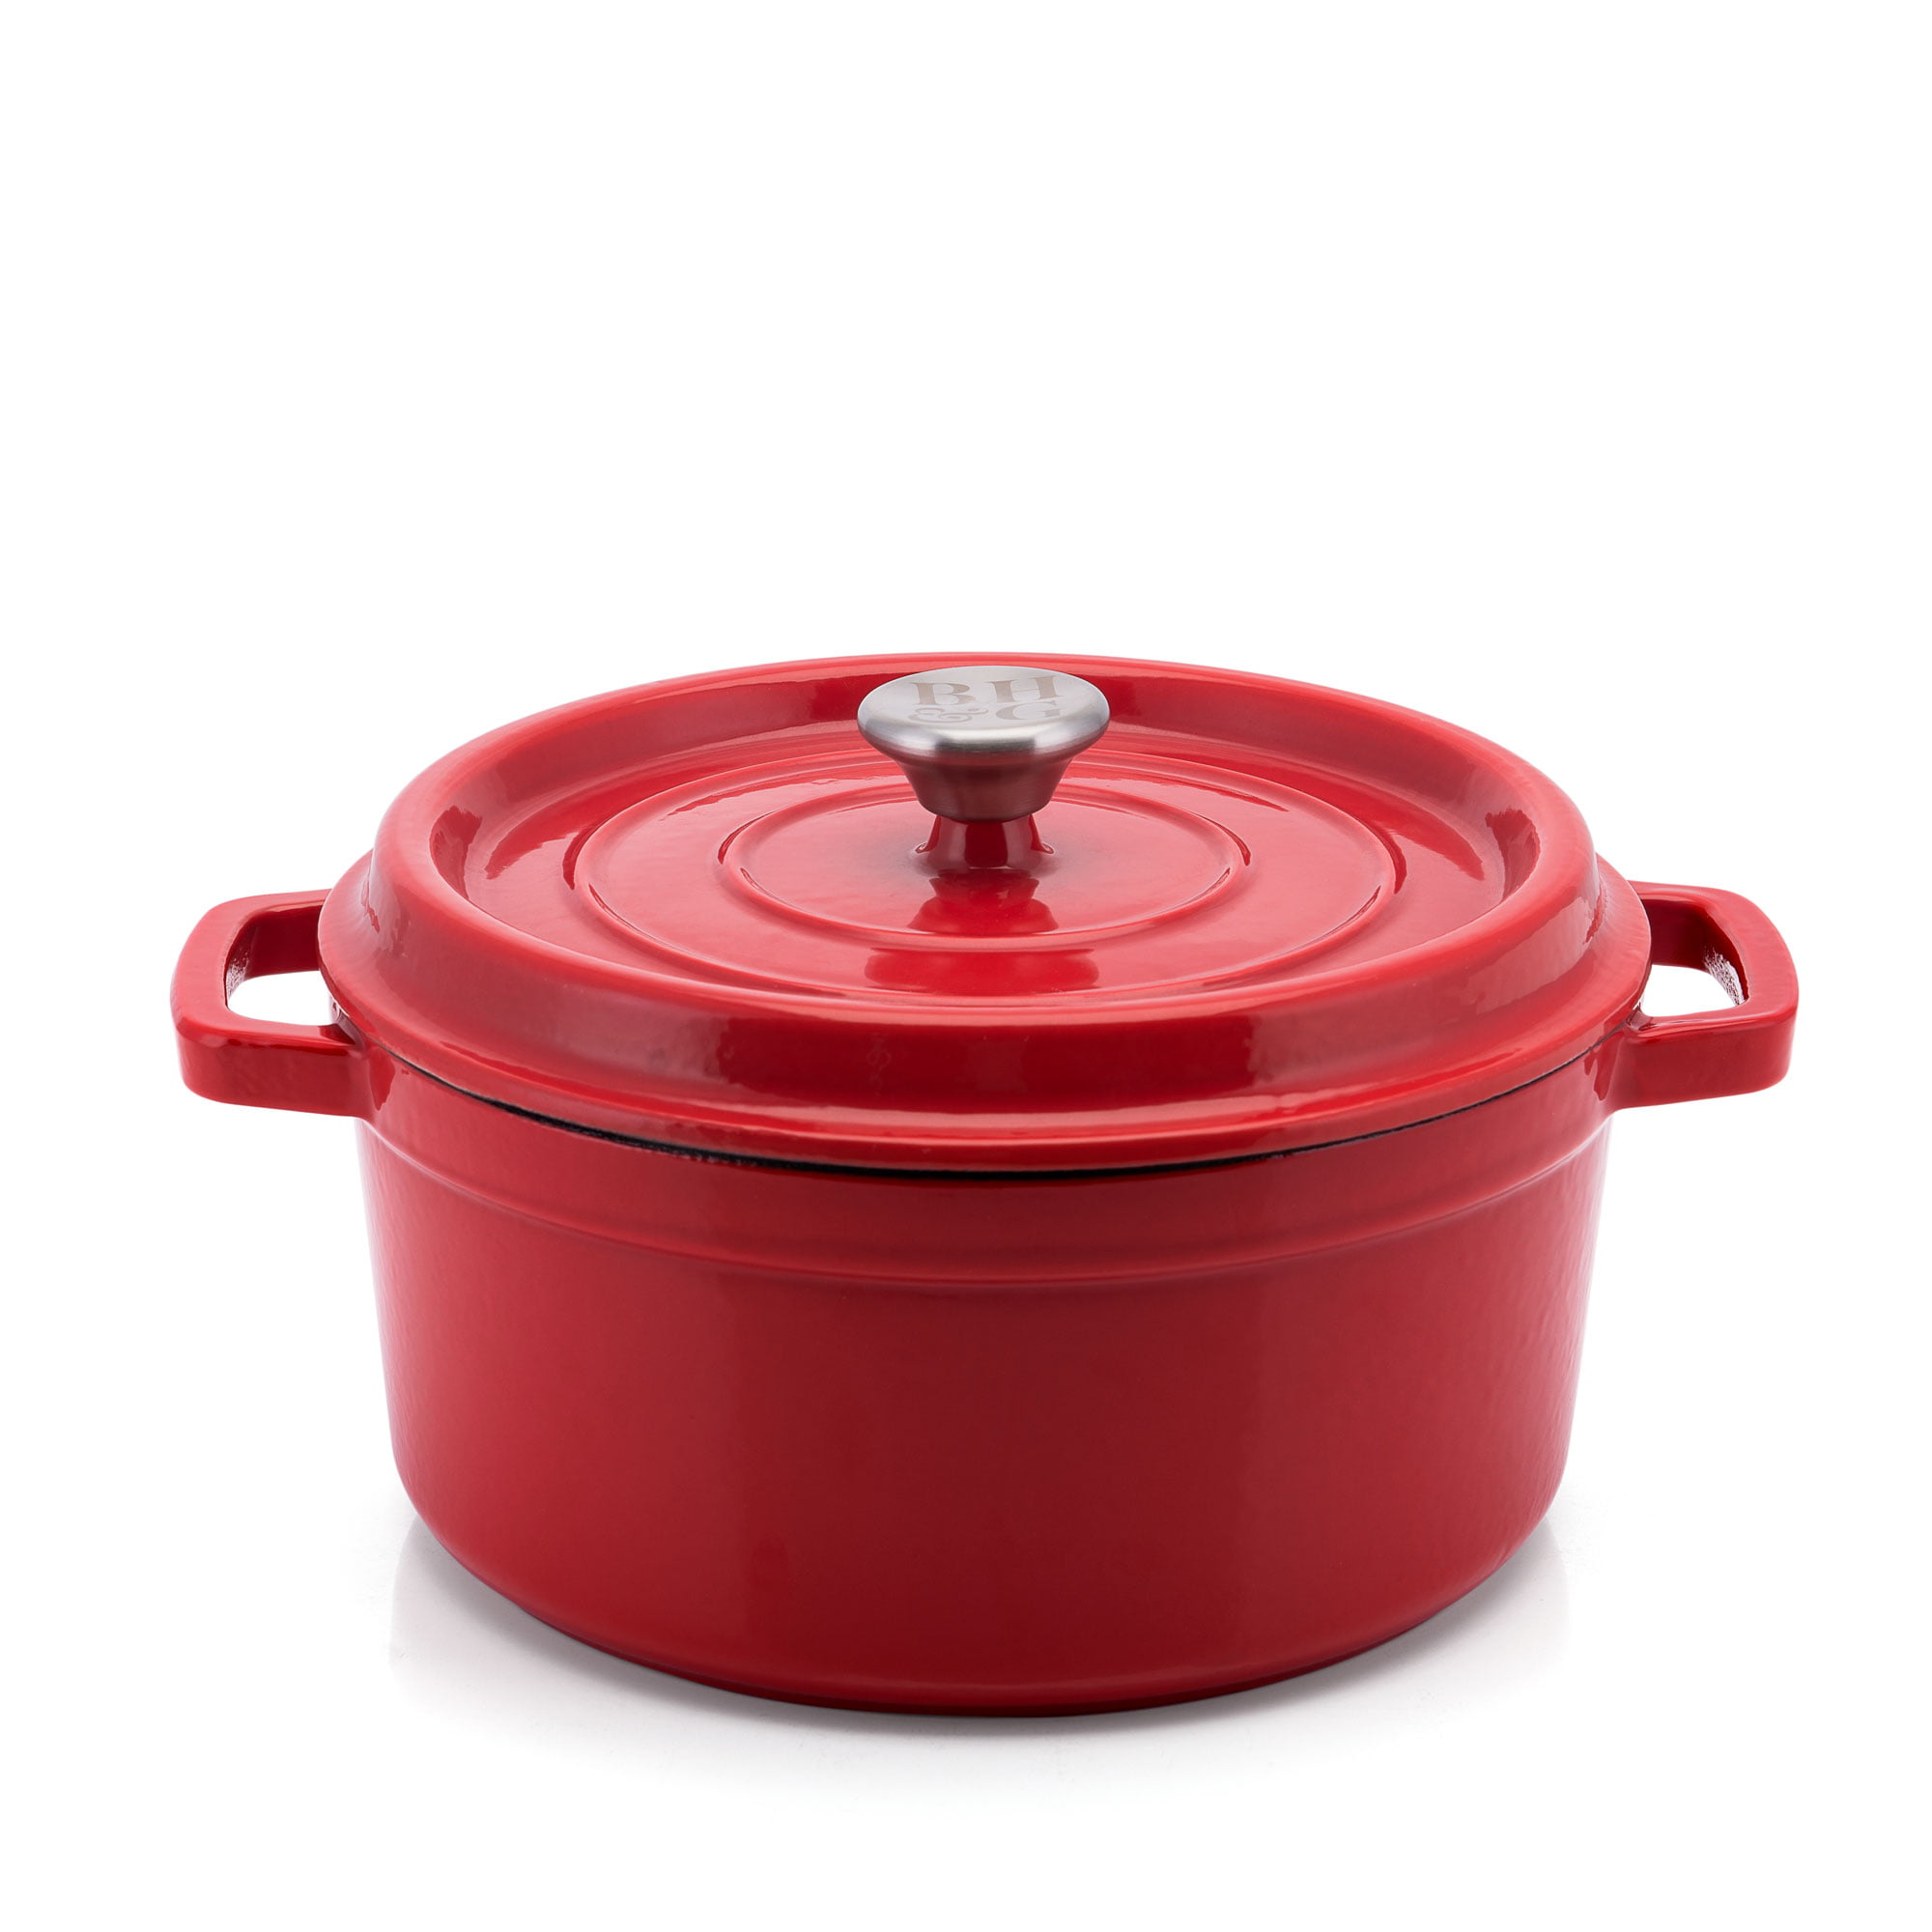 Dutch Oven Enameled Cast Iron Pot with Dual Handle and Cover Casserole Dish  - Round Red 10.23 (26 cm) - Best Life Now LLC